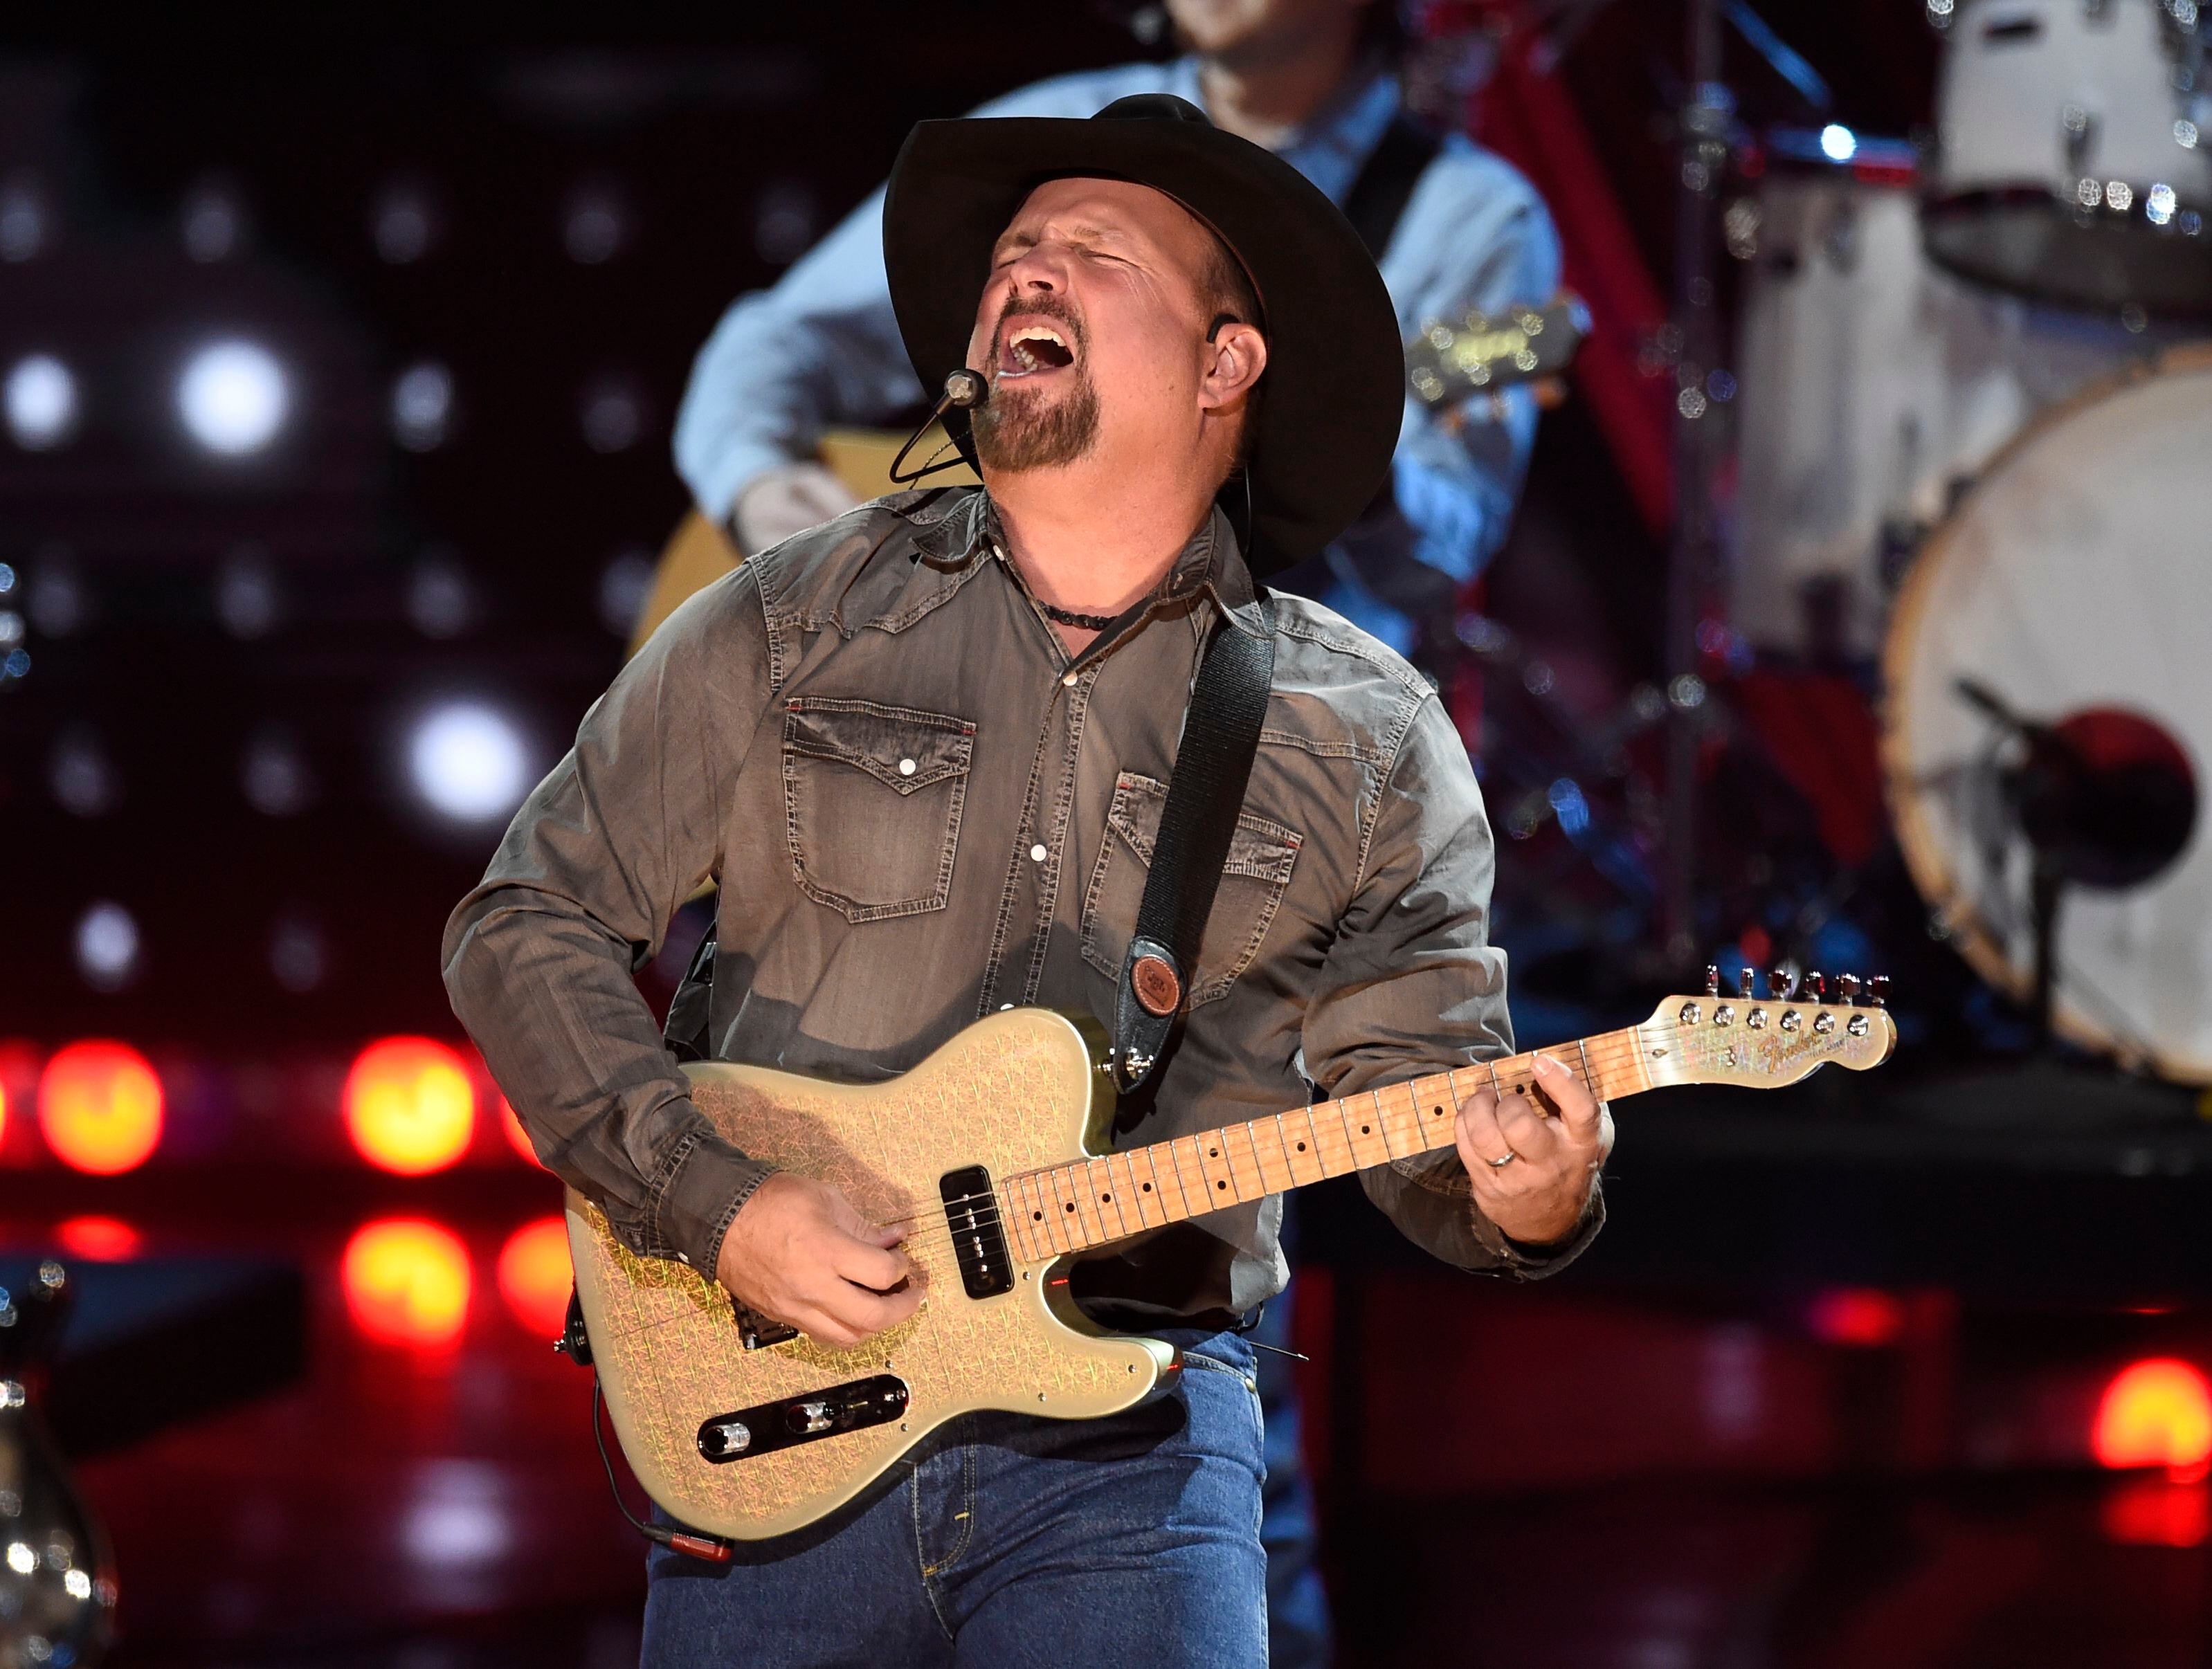 🔓Here’s your chance to win Garth Brooks concert tickets